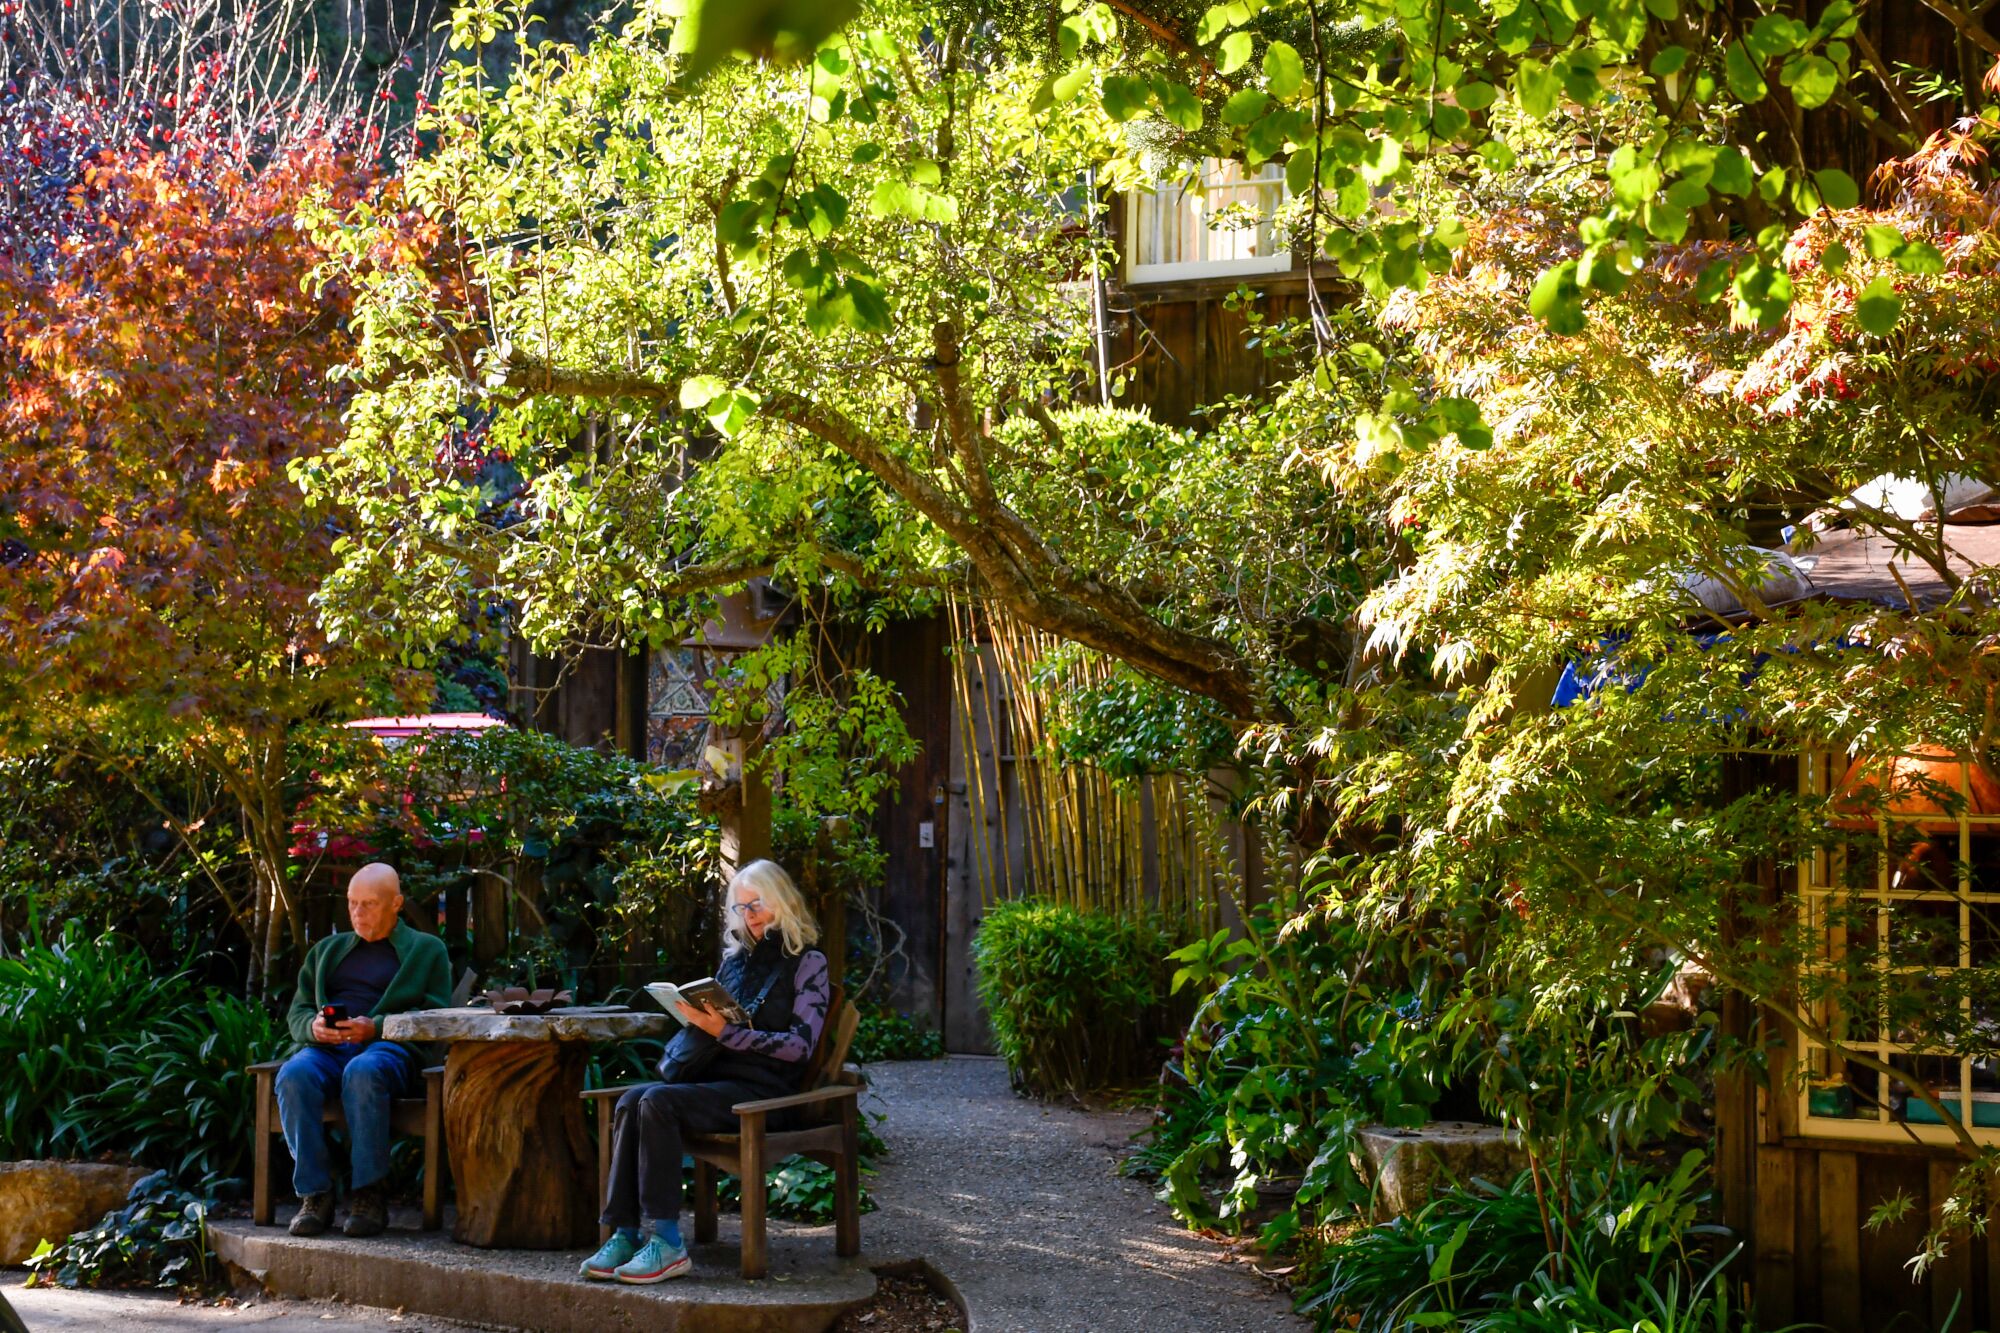 Deetjen's Big Sur Inn has offered food and lodging to travelers since the 1930s.